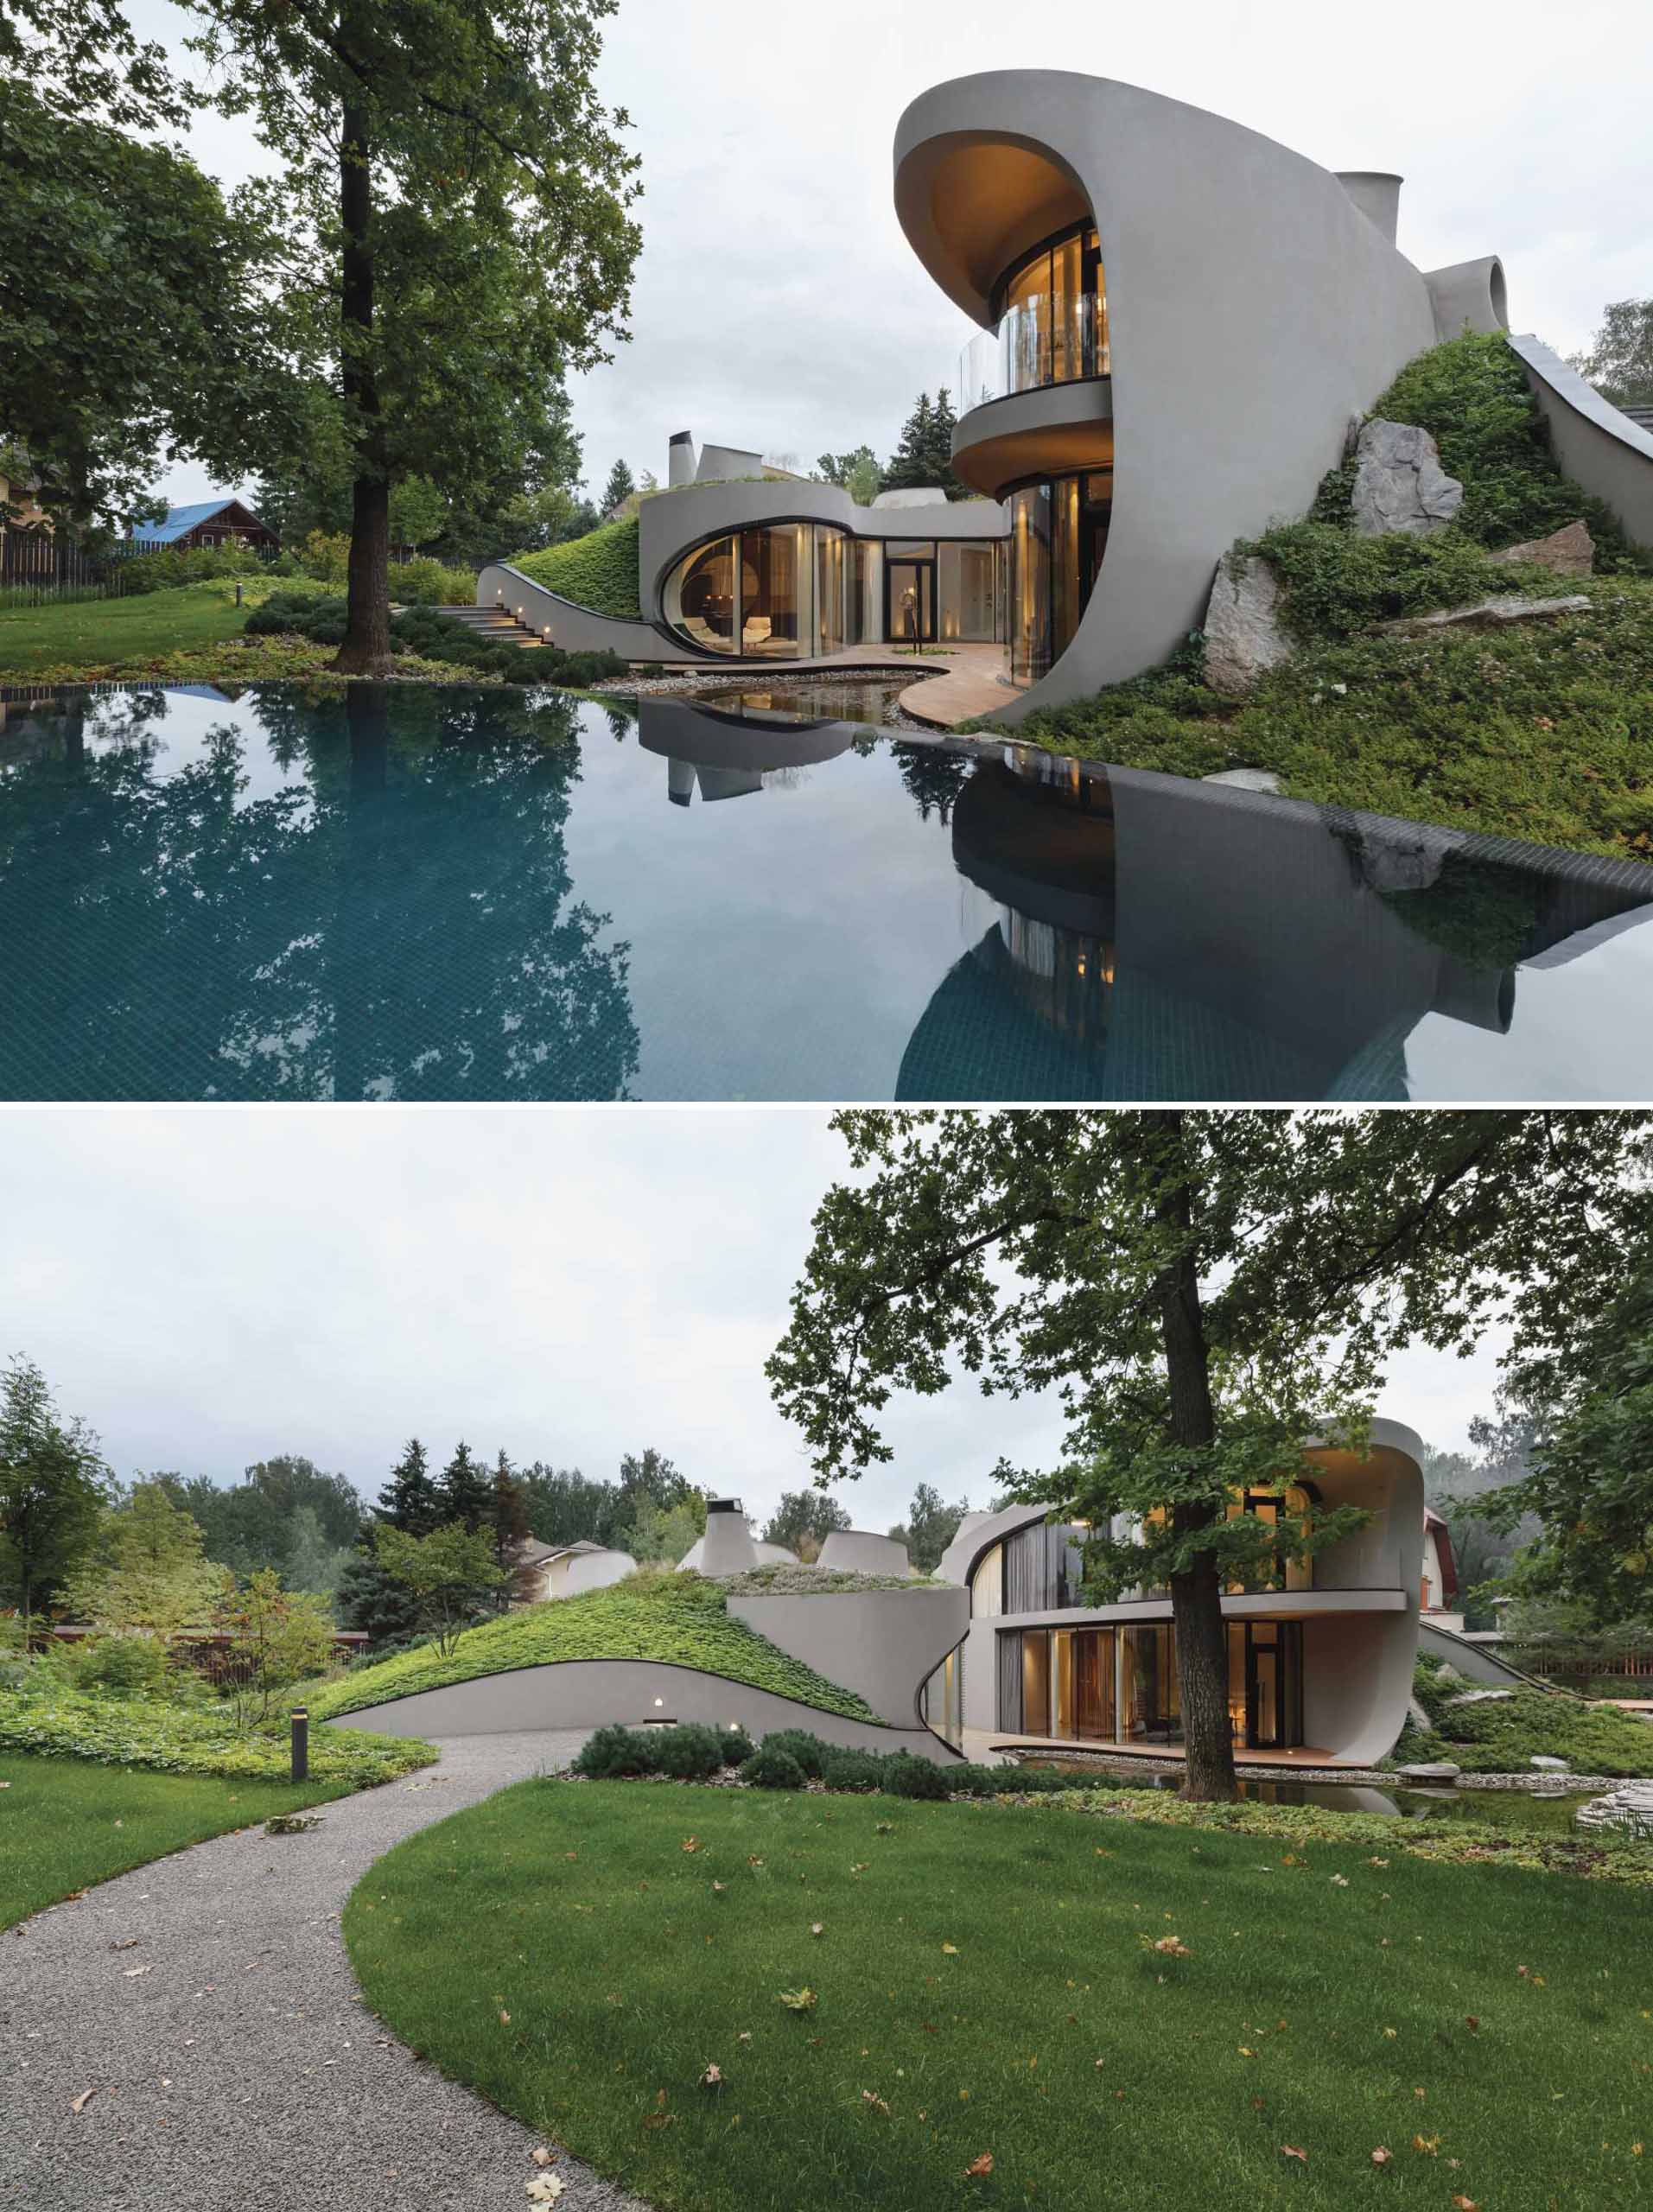 A modern sculptural home with curves that's been built into an artificially created landscape.